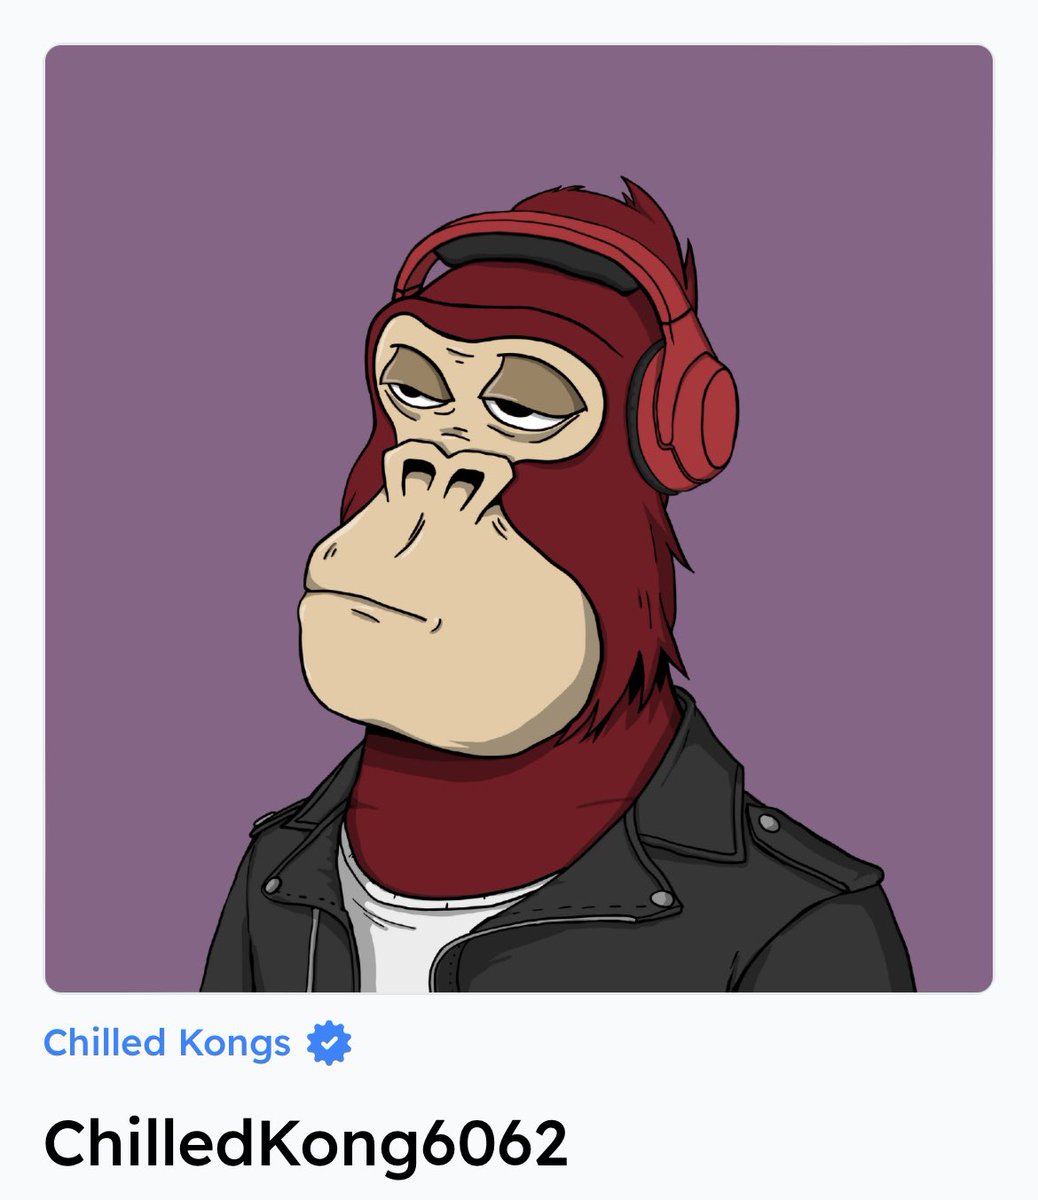 🦍Chilled Kongs' sale of the week goes to: ChilledKong6062 Sold for: ₳555 on @jpgstoreNFT 🎉Kongratulations to the buyer & seller🎉